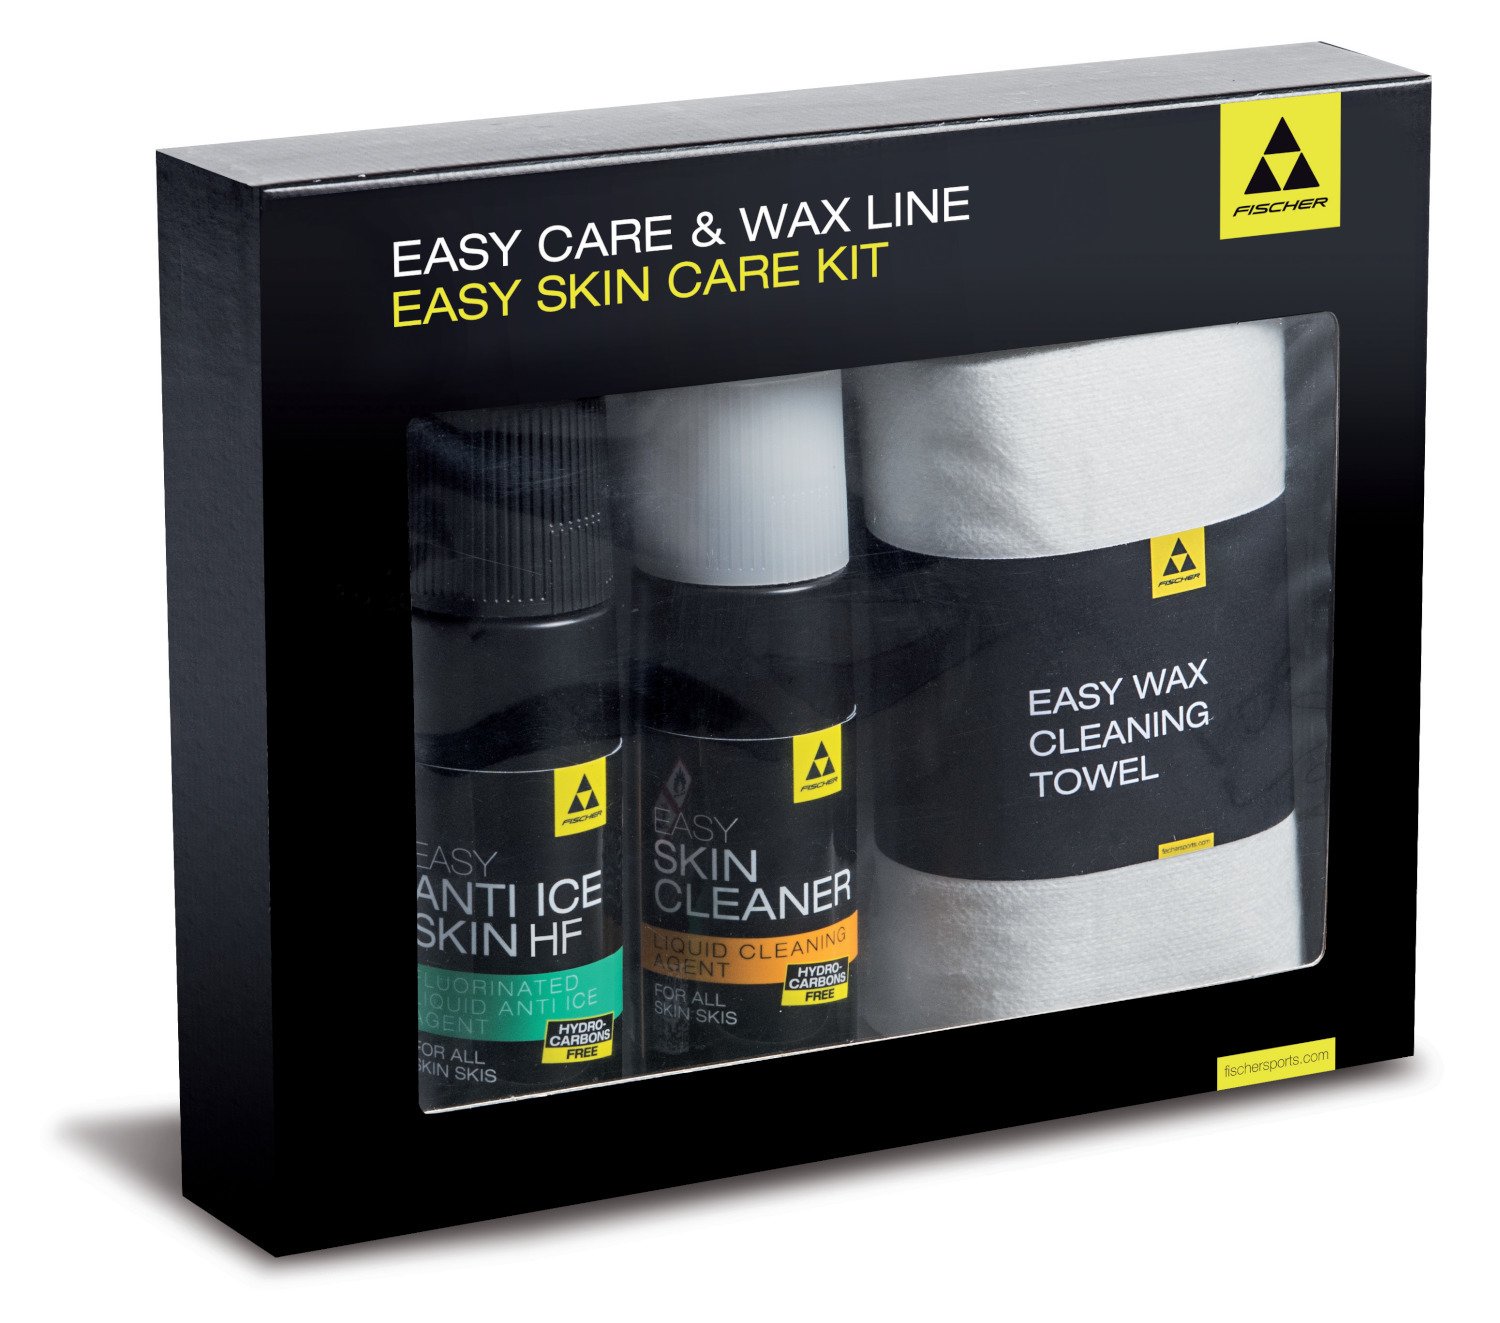 Ficher Easy Care & Wax